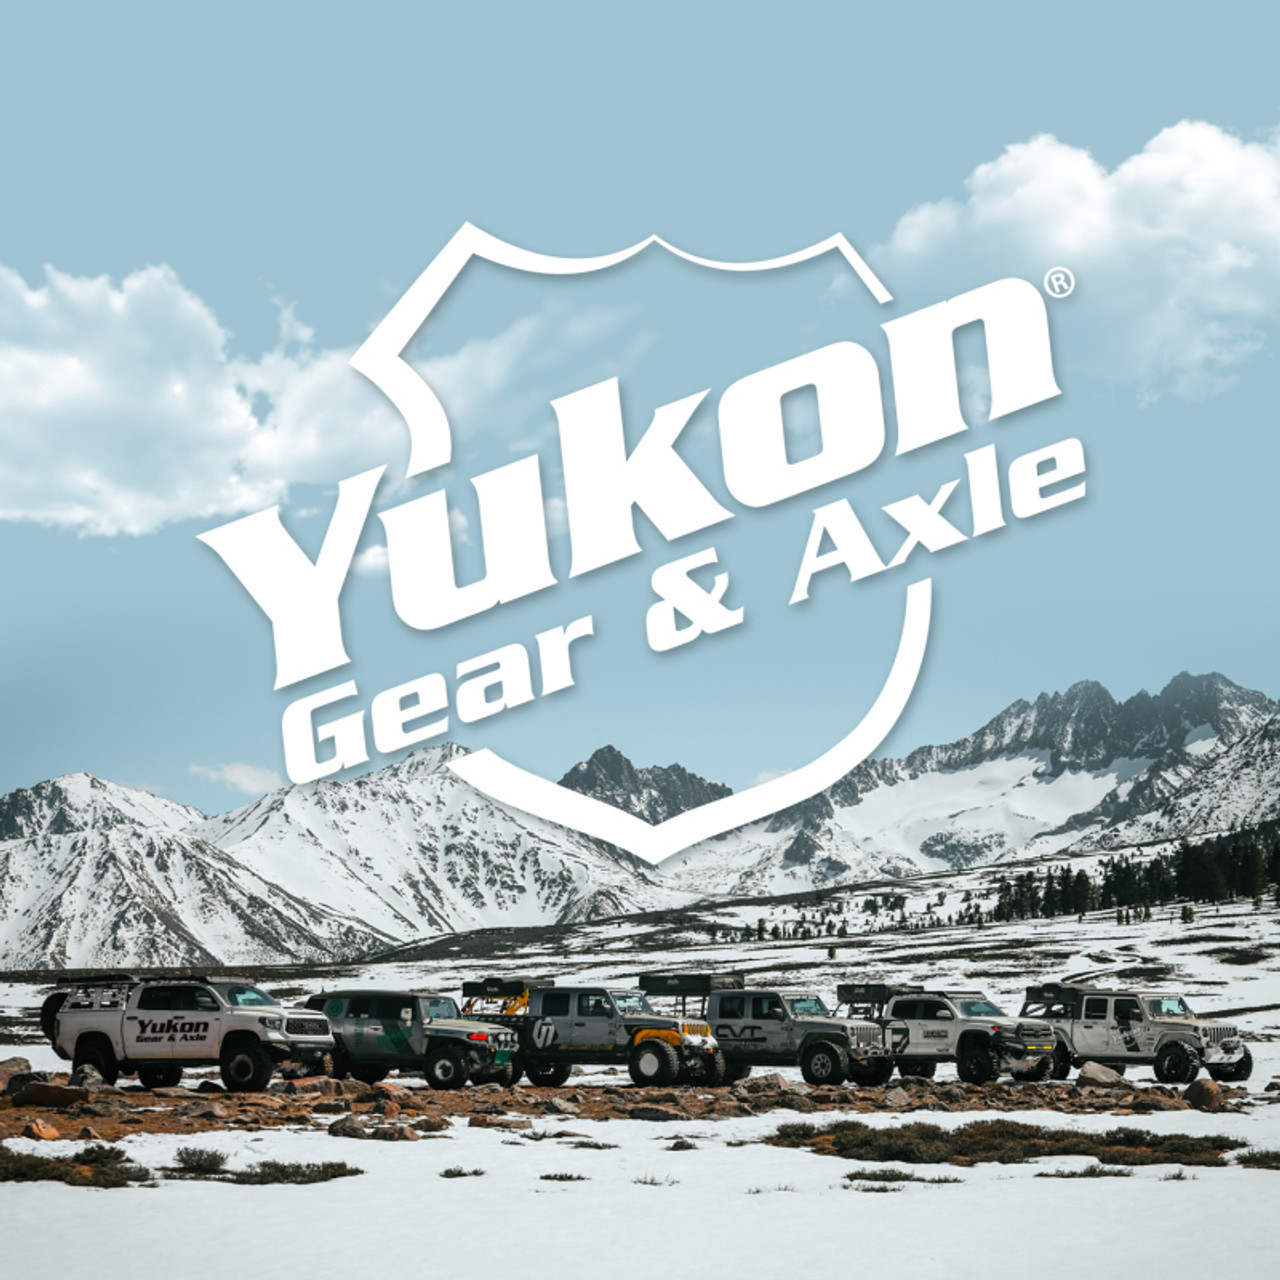 Yukon Gear 97-17 Ford E150 9.75in Rear Differentials Hardcore Cover - YHCC-F10.5 Photo - lifestyle view